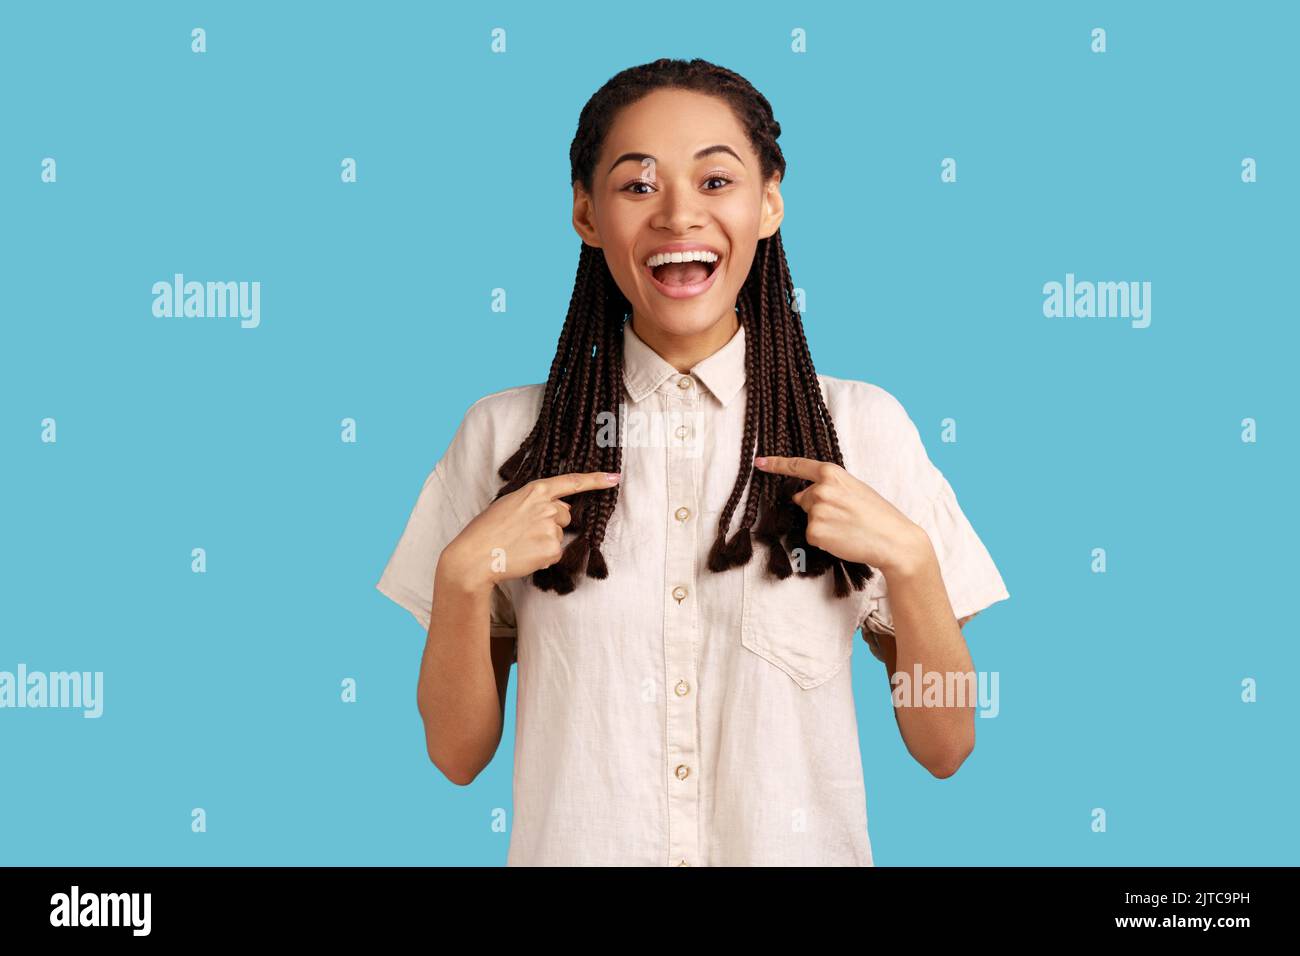 Cheerful excited woman with black dreadlocks pointing at herself and smiling broadly, extremely happy being chosen, wearing white shirt. Indoor studio shot isolated on blue background. Stock Photo